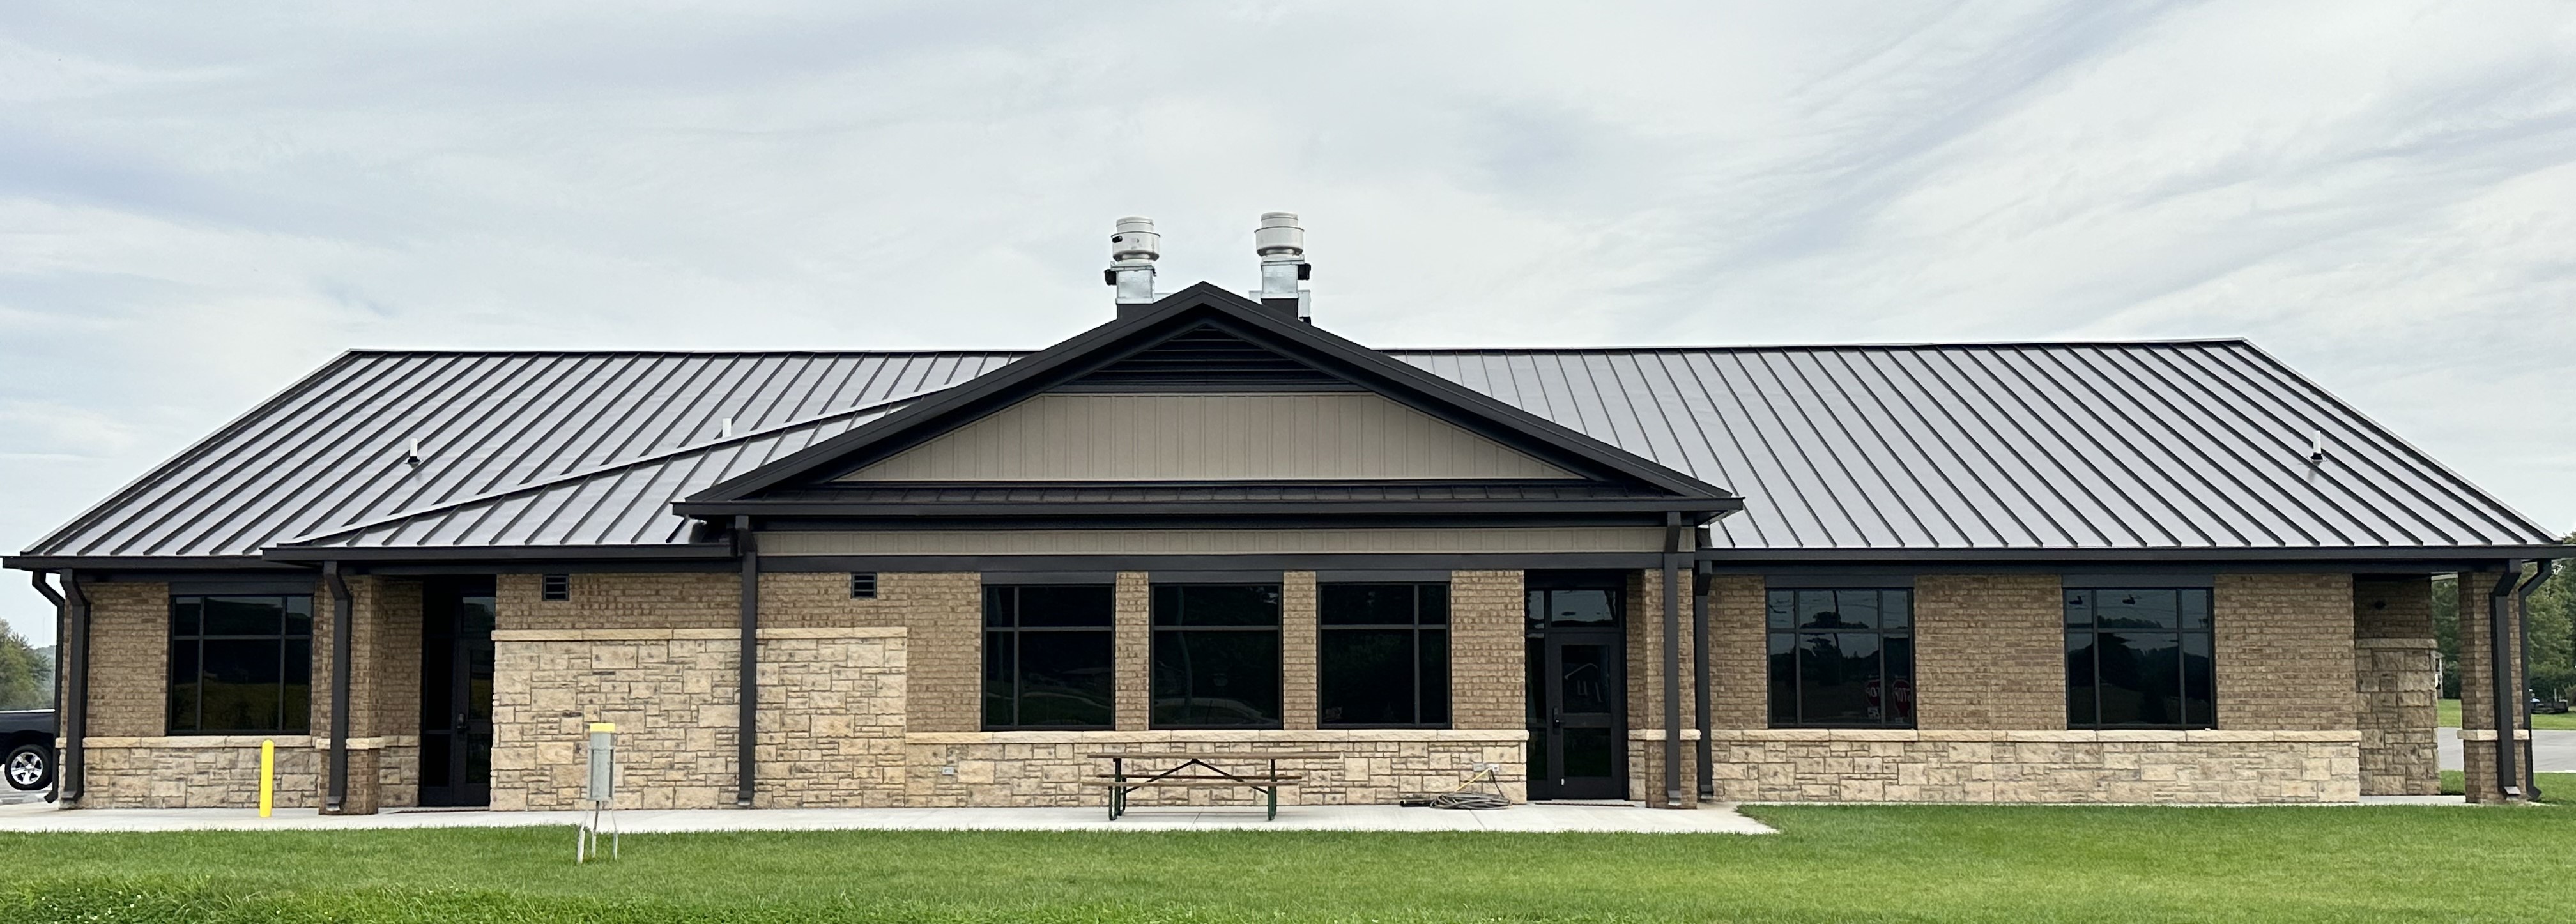 Todd County Extension Office